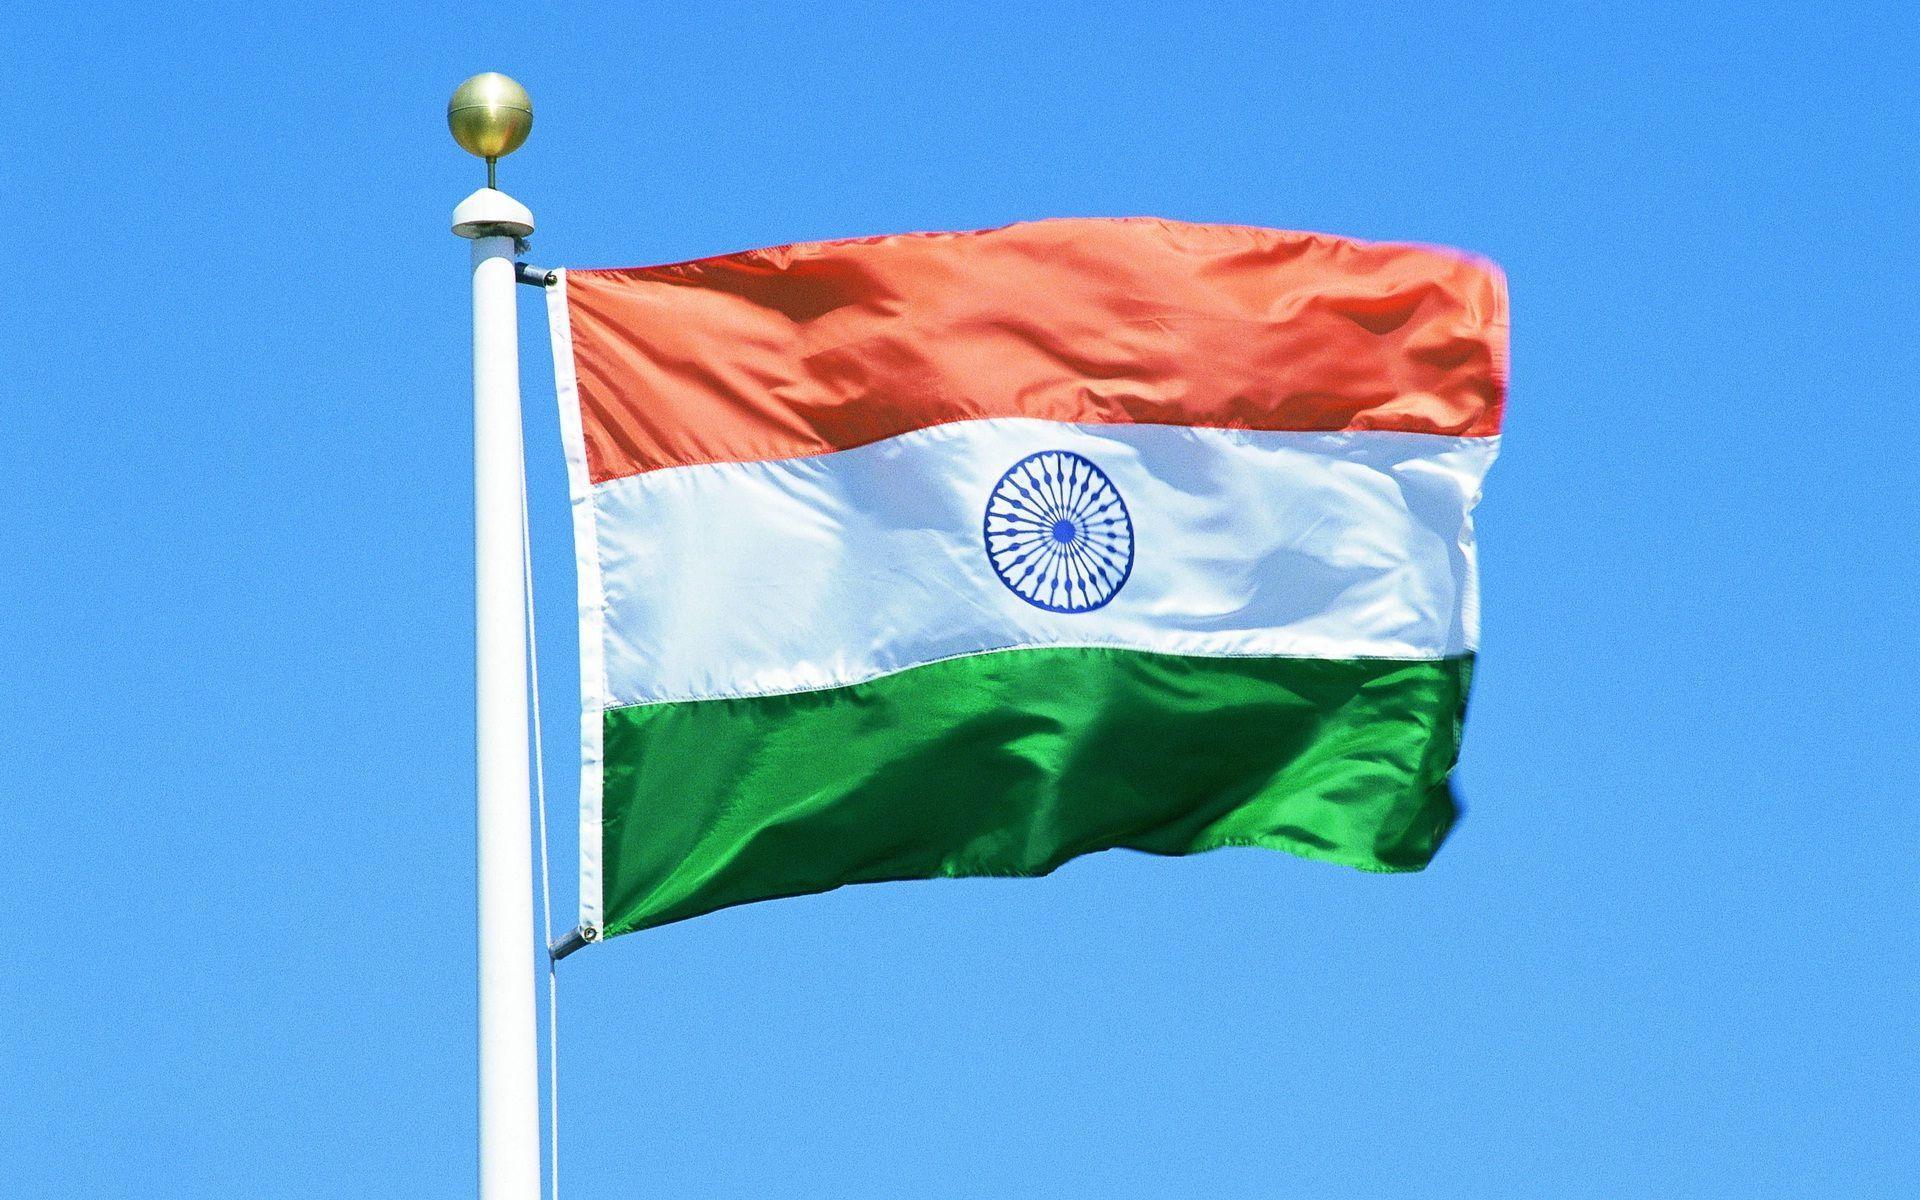 Download Wallpaper - Indian Flag 26 January , HD Wallpaper & Backgrounds